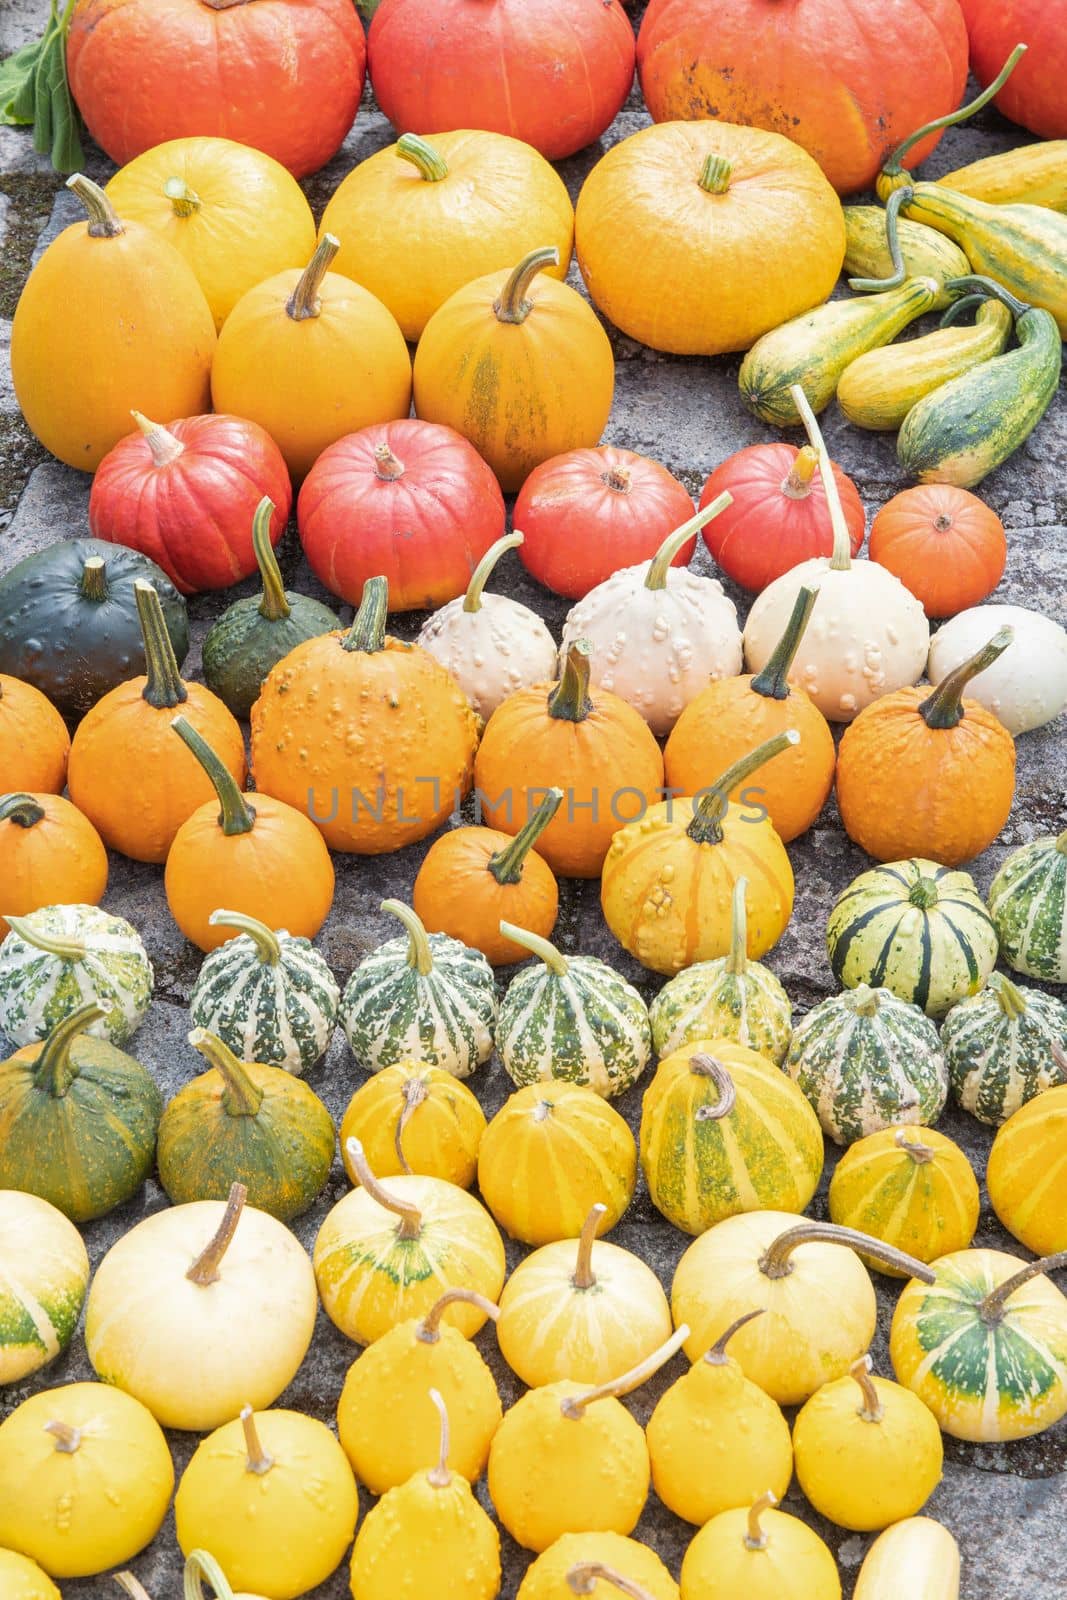 a large harvest of bright multi-colored pumpkins in the garden, vegetables by KaterinaDalemans